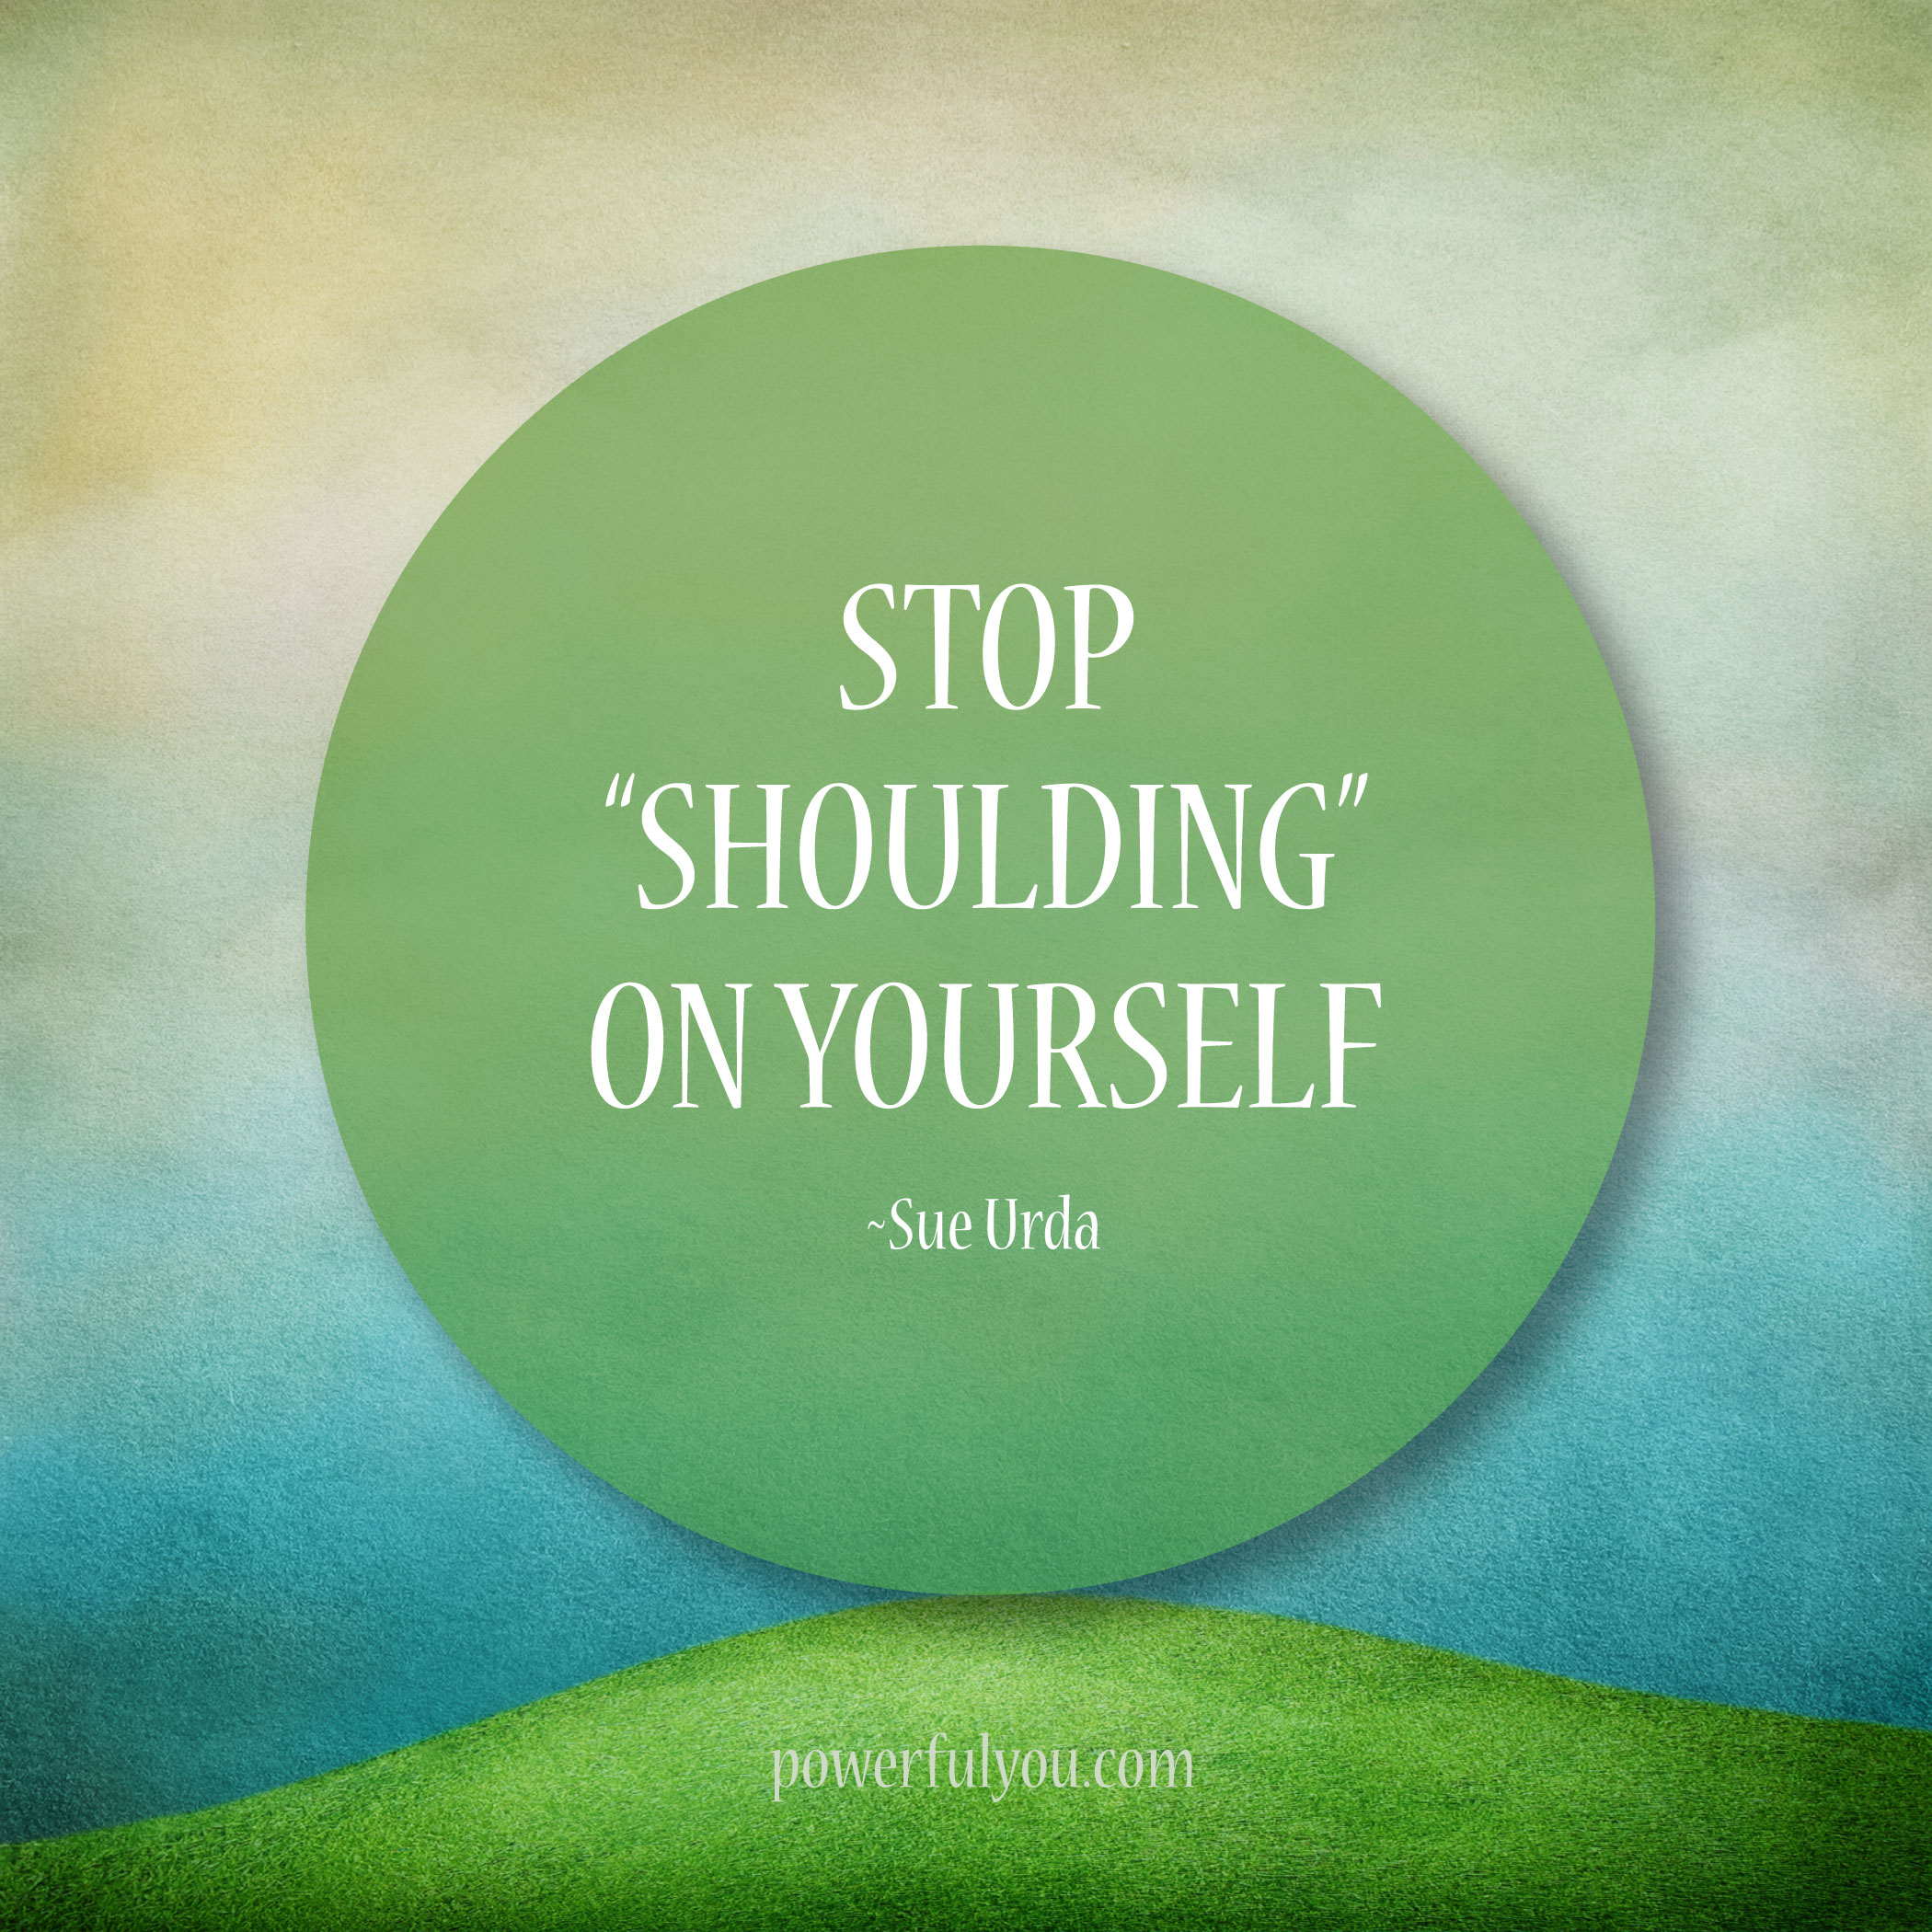 Stop ‘shoulding’ on yourself.